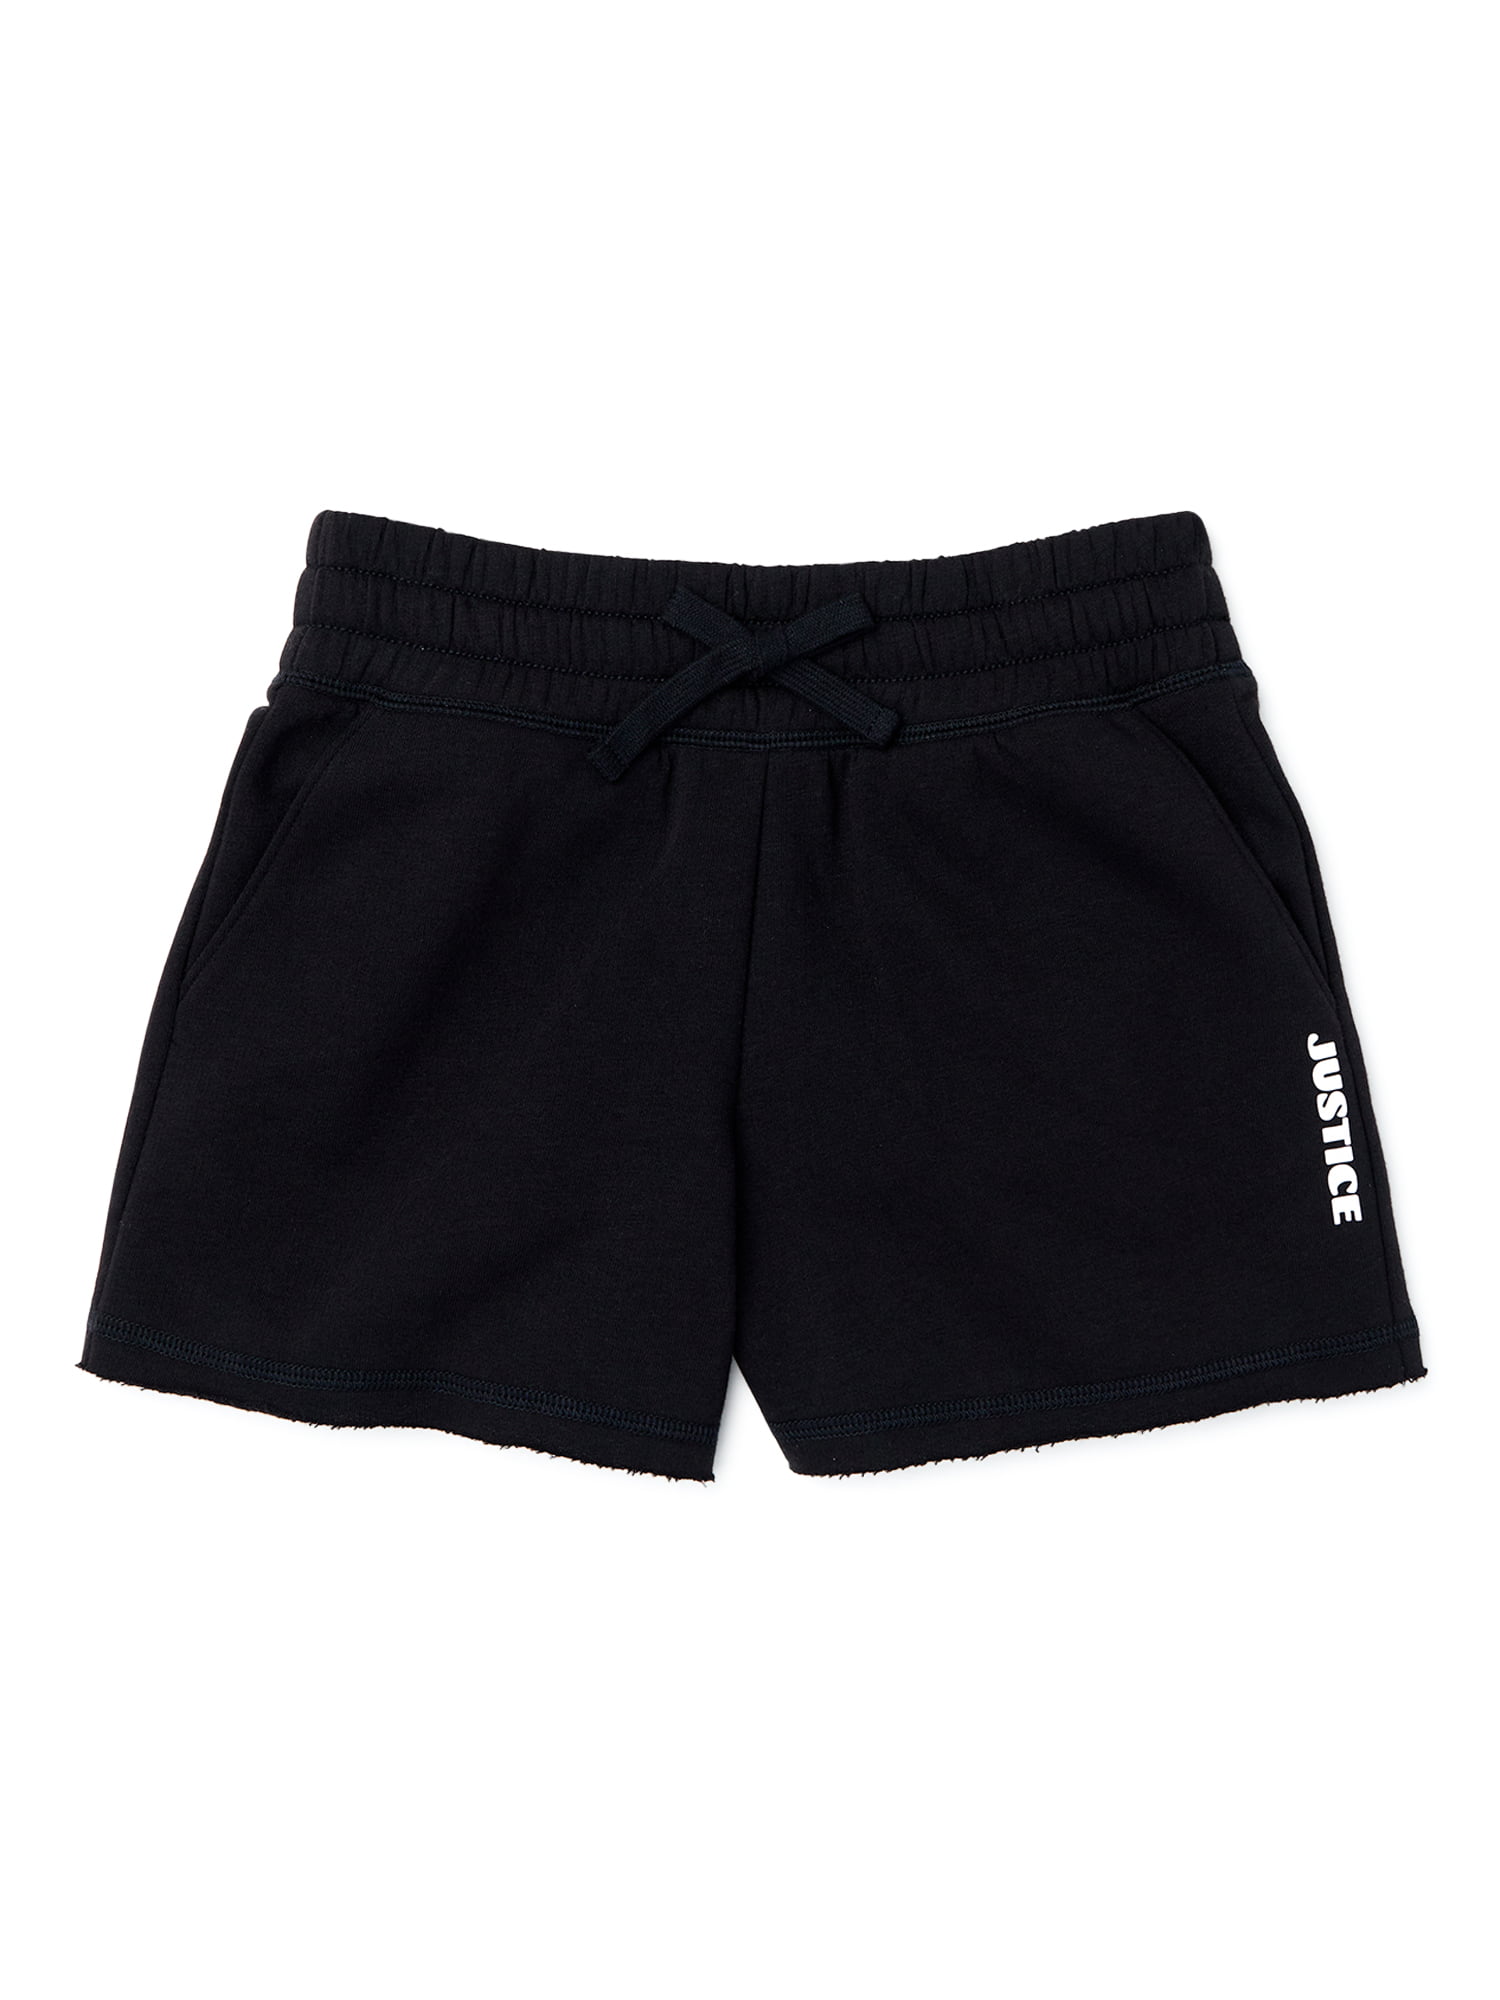 Justice Girls French Terry Solid Midi Shorts, Sizes 4-18 & Plus ...